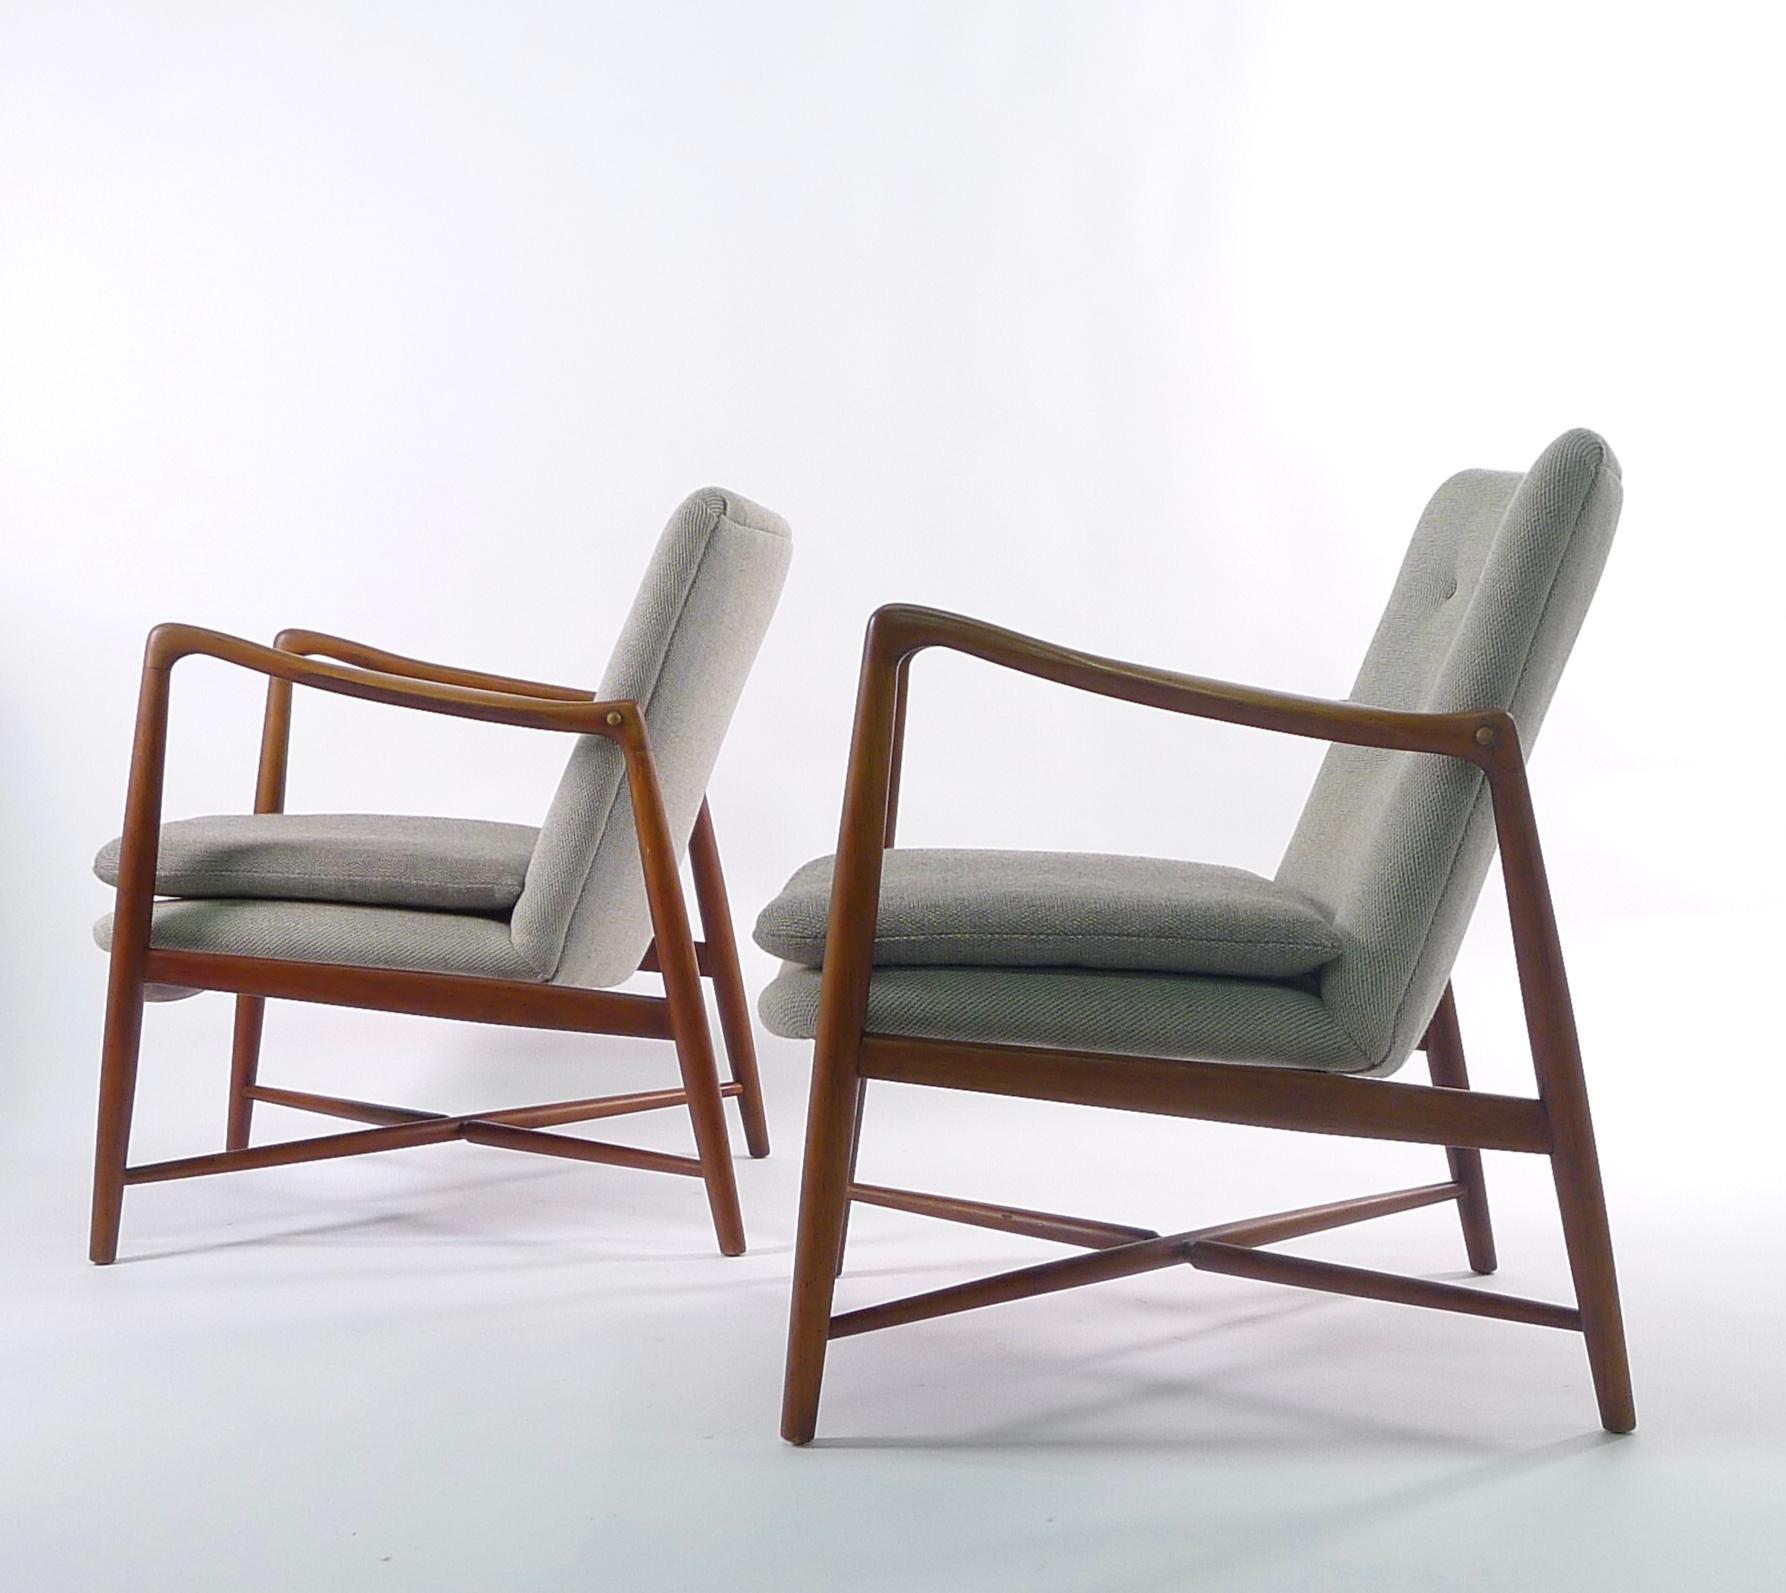 A rare pair of easy chairs, model BO59, designed by Finn Juhl and manufactured by Bovirke, Denmark, circa 1946.

This iconic design is known as the Westermanns Kaminstol or Fireside Chair.

Beautiful teak wood frames, stamped by manufacturer, newly